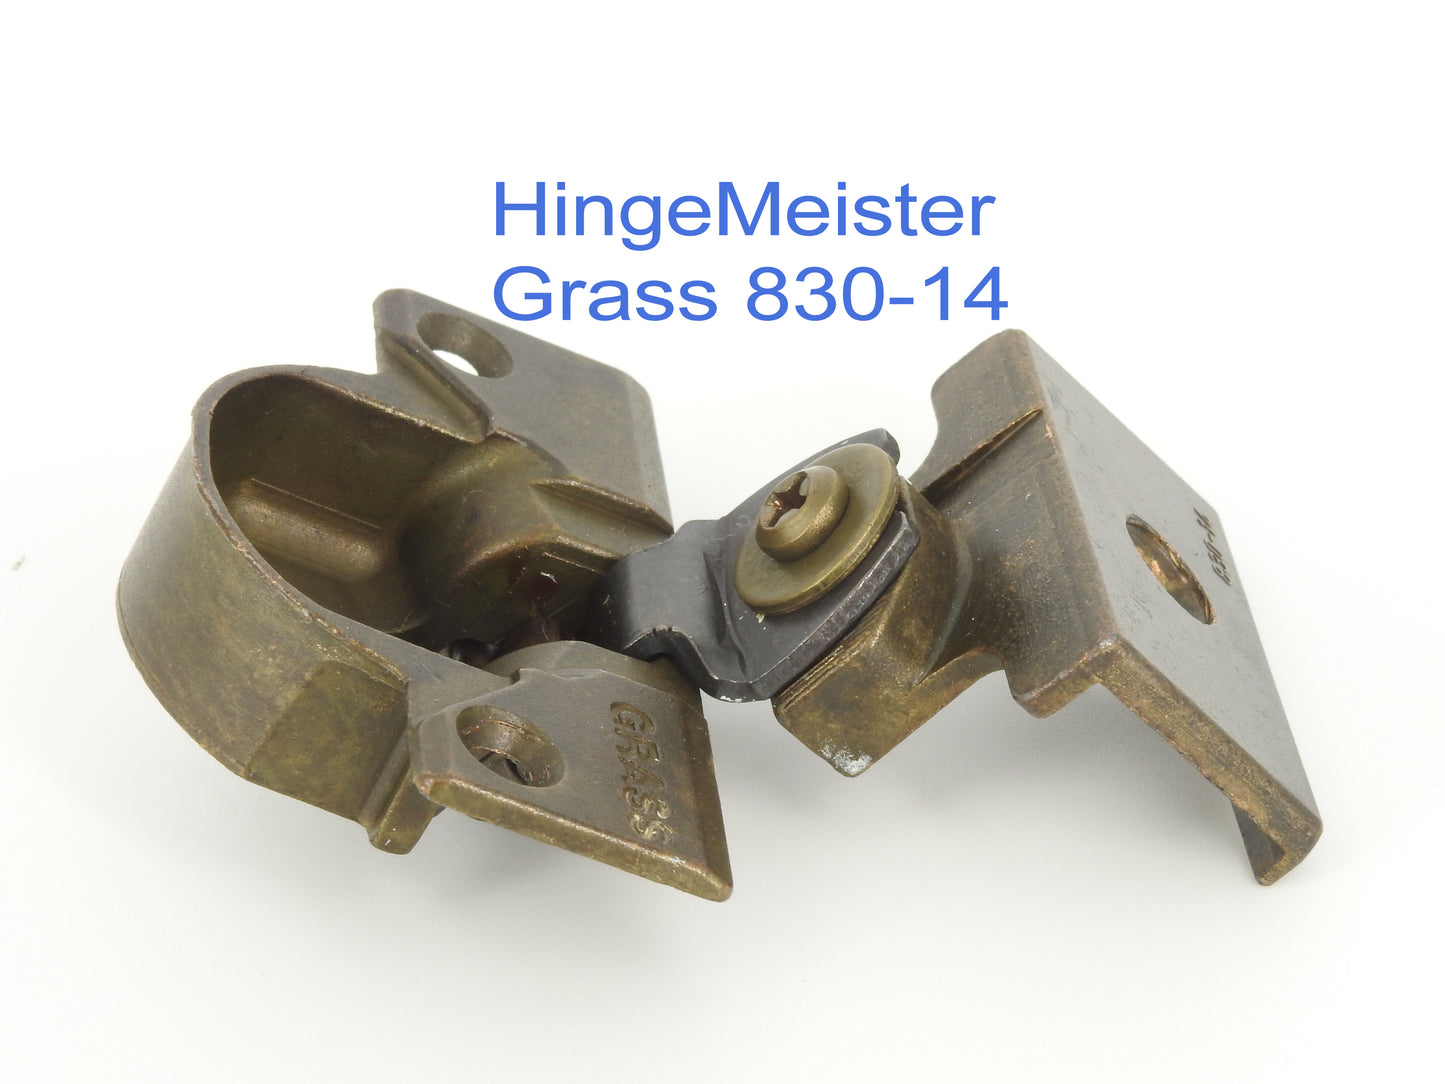 Grass 830-14 Bronze Hinge and mounting plate - Complete Hinge - Refurbished